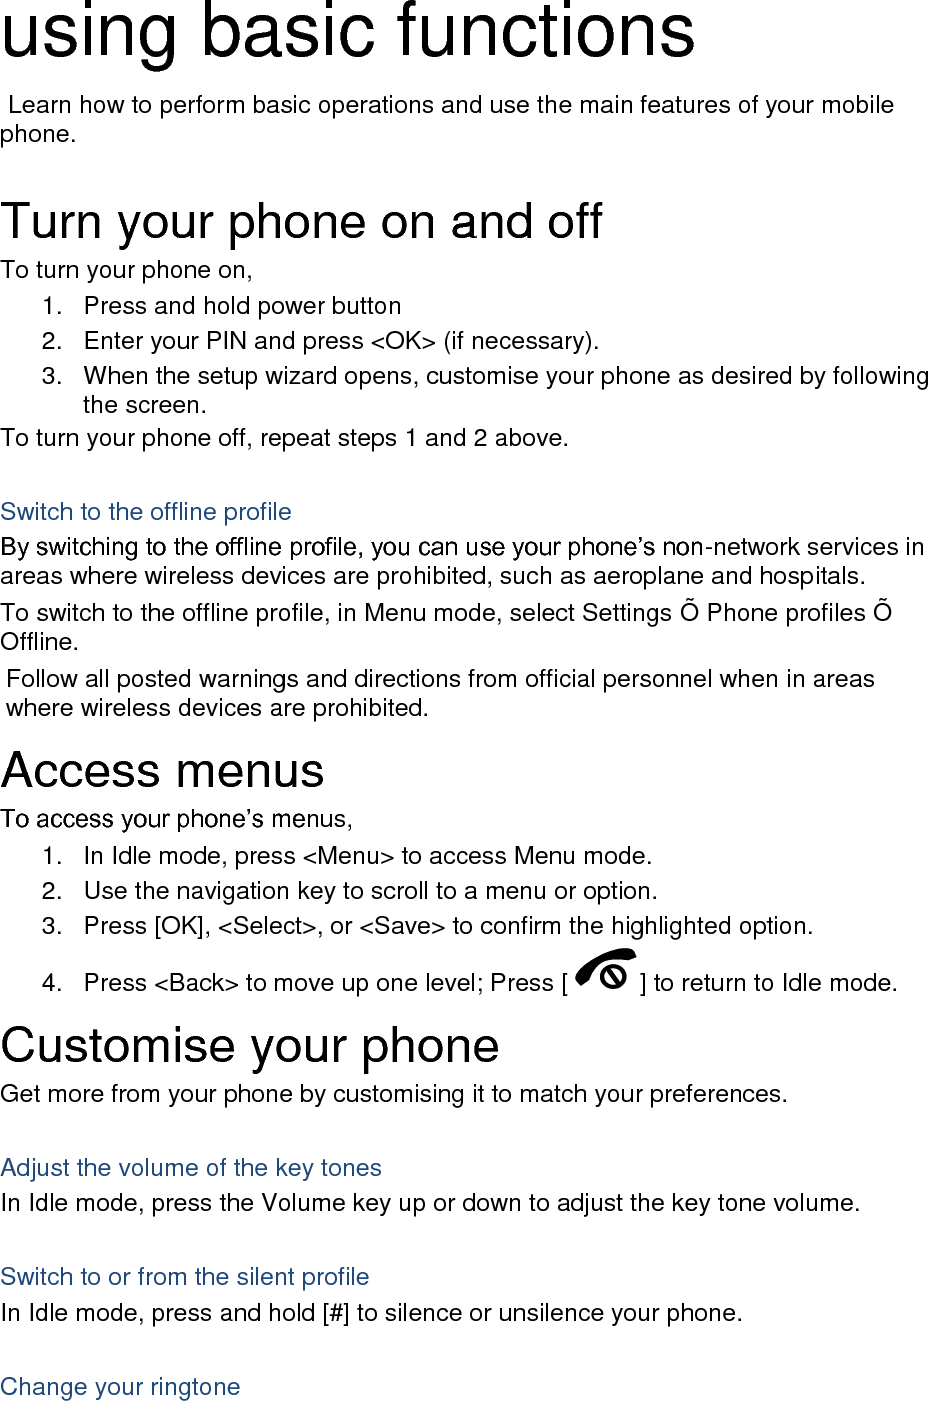 using basic functions  Learn how to perform basic operations and use the main features of your mobile phone.    Turn your phone on and off To turn your phone on, 1.  Press and hold power button 2.  Enter your PIN and press &lt;OK&gt; (if necessary). 3.  When the setup wizard opens, customise your phone as desired by following the screen. To turn your phone off, repeat steps 1 and 2 above.  Switch to the offline profile By switching to the offline profile, you can use your phone’s non-network services in areas where wireless devices are prohibited, such as aeroplane and hospitals. To switch to the offline profile, in Menu mode, select Settings Õ  Phone profiles Õ  Offline. Follow all posted warnings and directions from official personnel when in areas where wireless devices are prohibited. Access menus To access your phone’s menus, 1.  In Idle mode, press &lt;Menu&gt; to access Menu mode. 2.  Use the navigation key to scroll to a menu or option. 3.  Press [OK], &lt;Select&gt;, or &lt;Save&gt; to confirm the highlighted option. 4.  Press &lt;Back&gt; to move up one level; Press [ ] to return to Idle mode. Customise your phone Get more from your phone by customising it to match your preferences.  Adjust the volume of the key tones In Idle mode, press the Volume key up or down to adjust the key tone volume.  Switch to or from the silent profile In Idle mode, press and hold [#] to silence or unsilence your phone.  Change your ringtone 